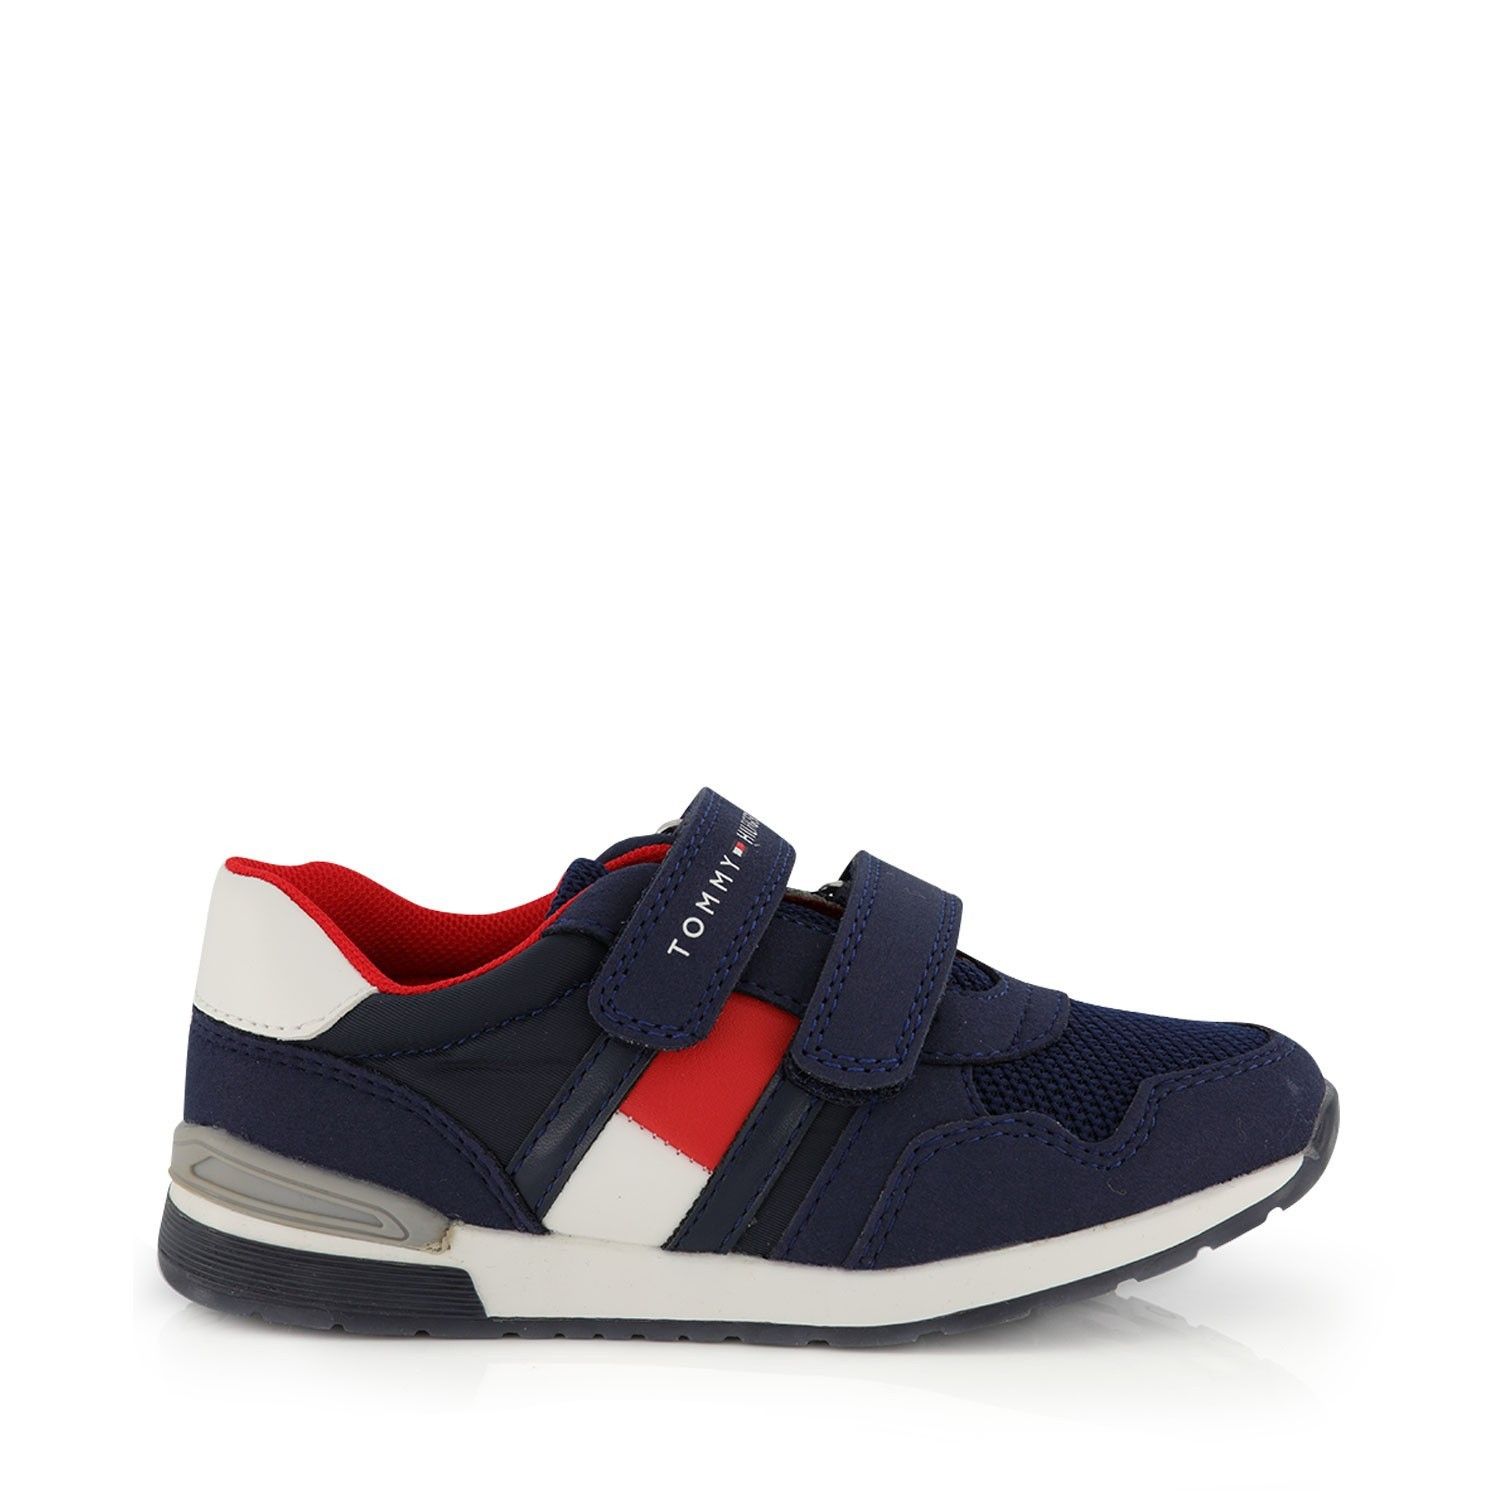 tommy hilfiger shoes baby boy